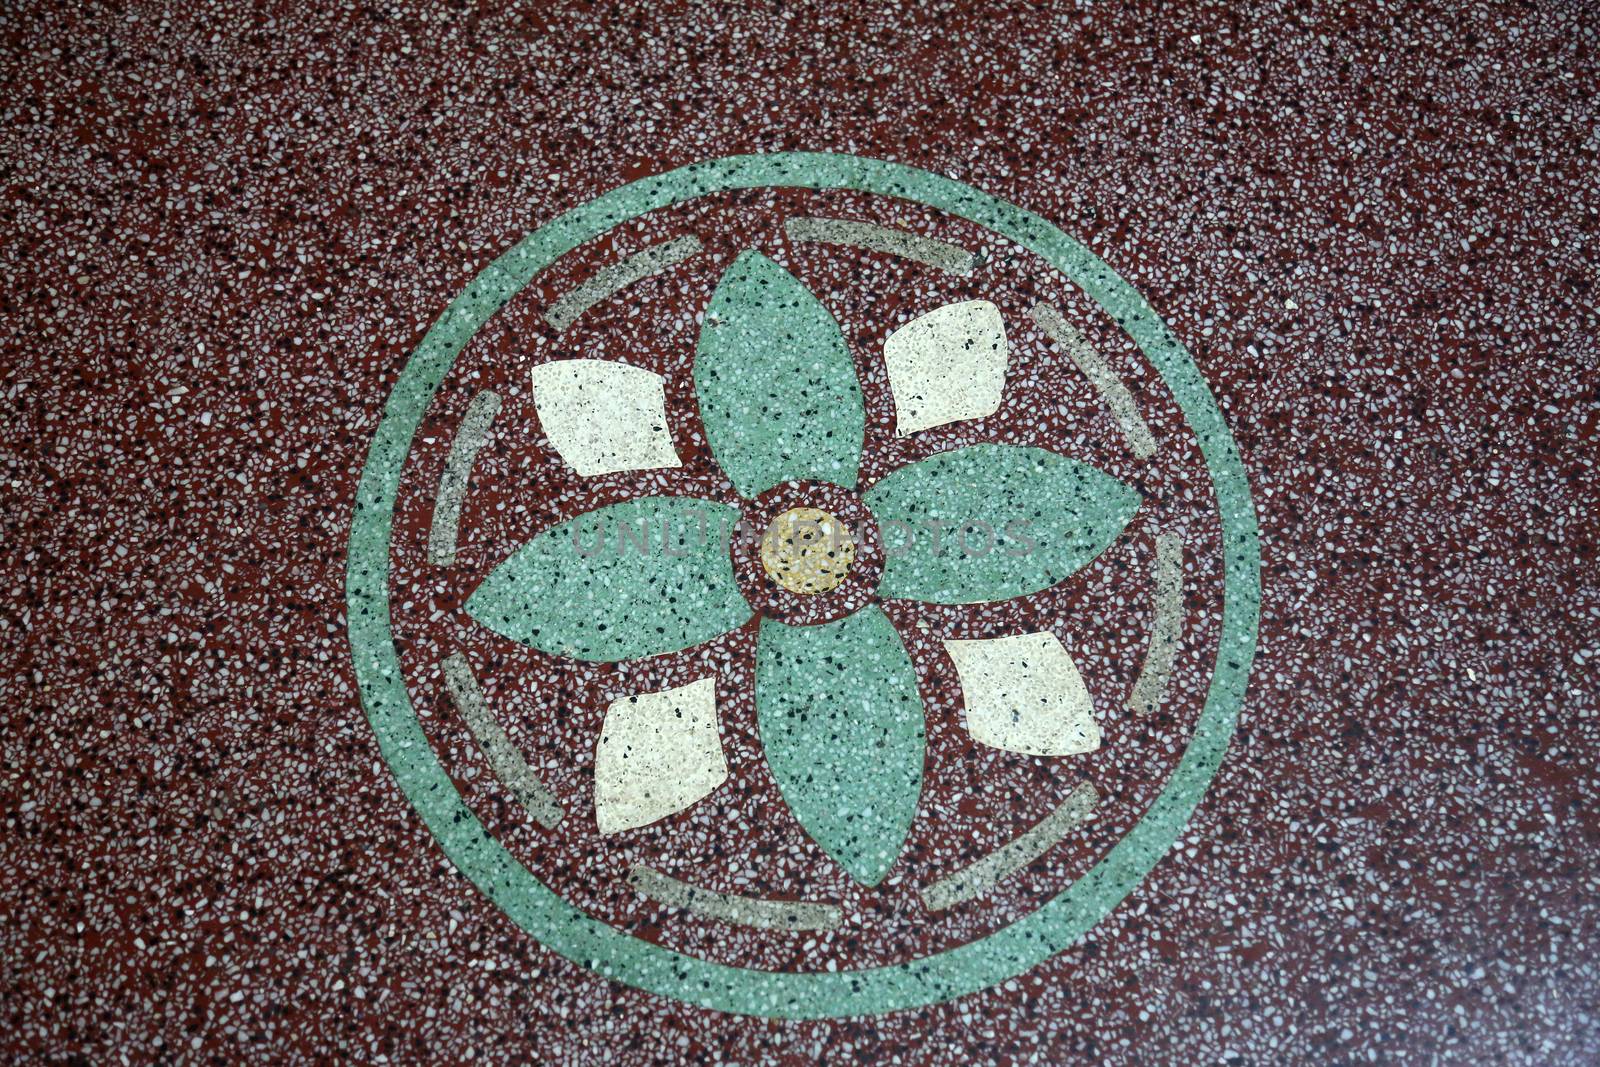 Decorative floor in Daya Dan, one of the houses established by Mother Teresa and run by the Missionaries of Charity, Kolkata, West Bengal, India on February 08, 2014.